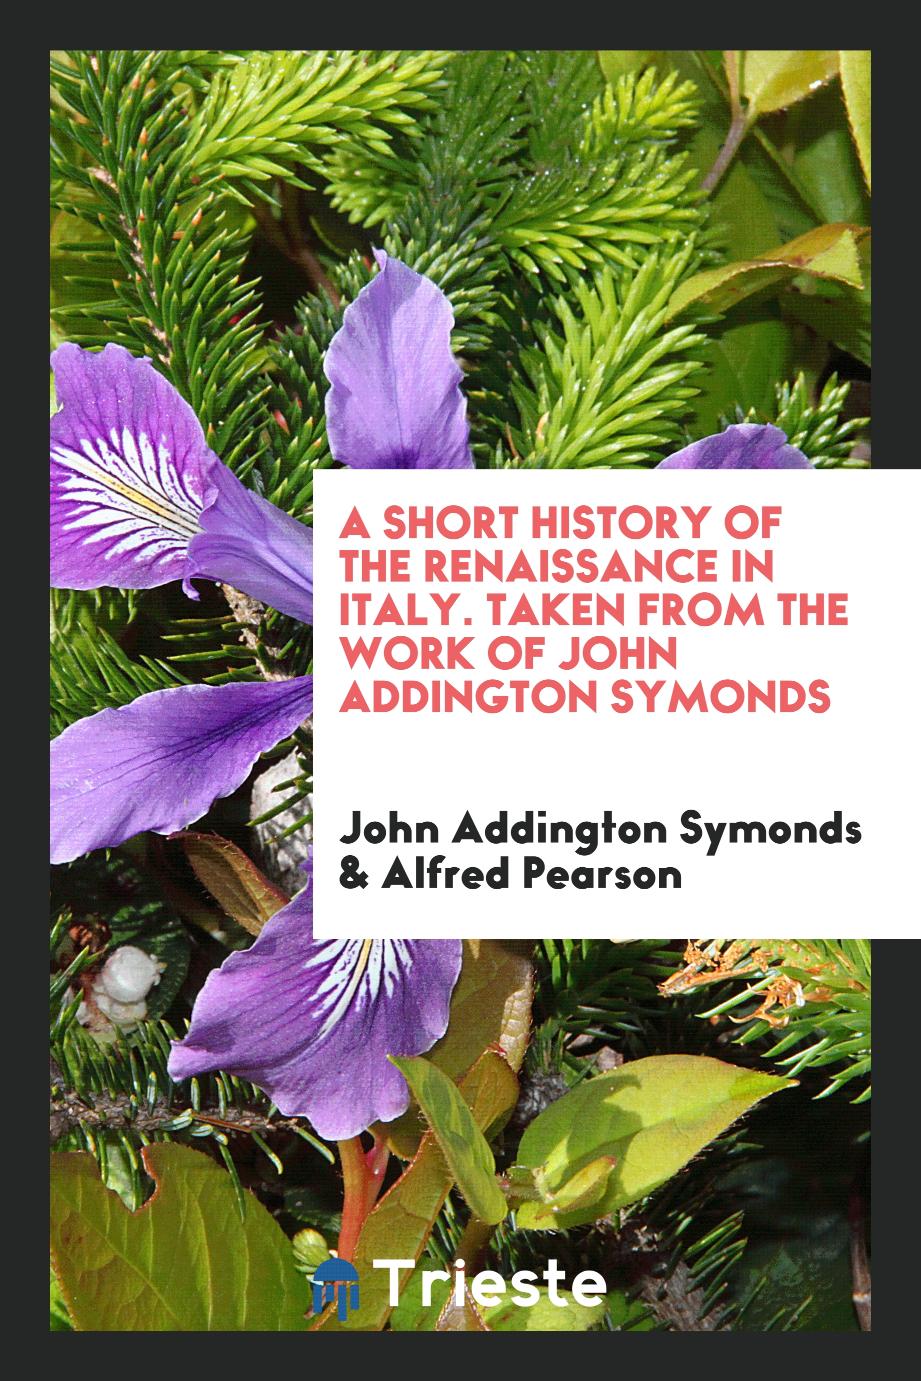 John Addington Symonds, Alfred Pearson - A Short History of the Renaissance in Italy. Taken from the Work of John Addington Symonds